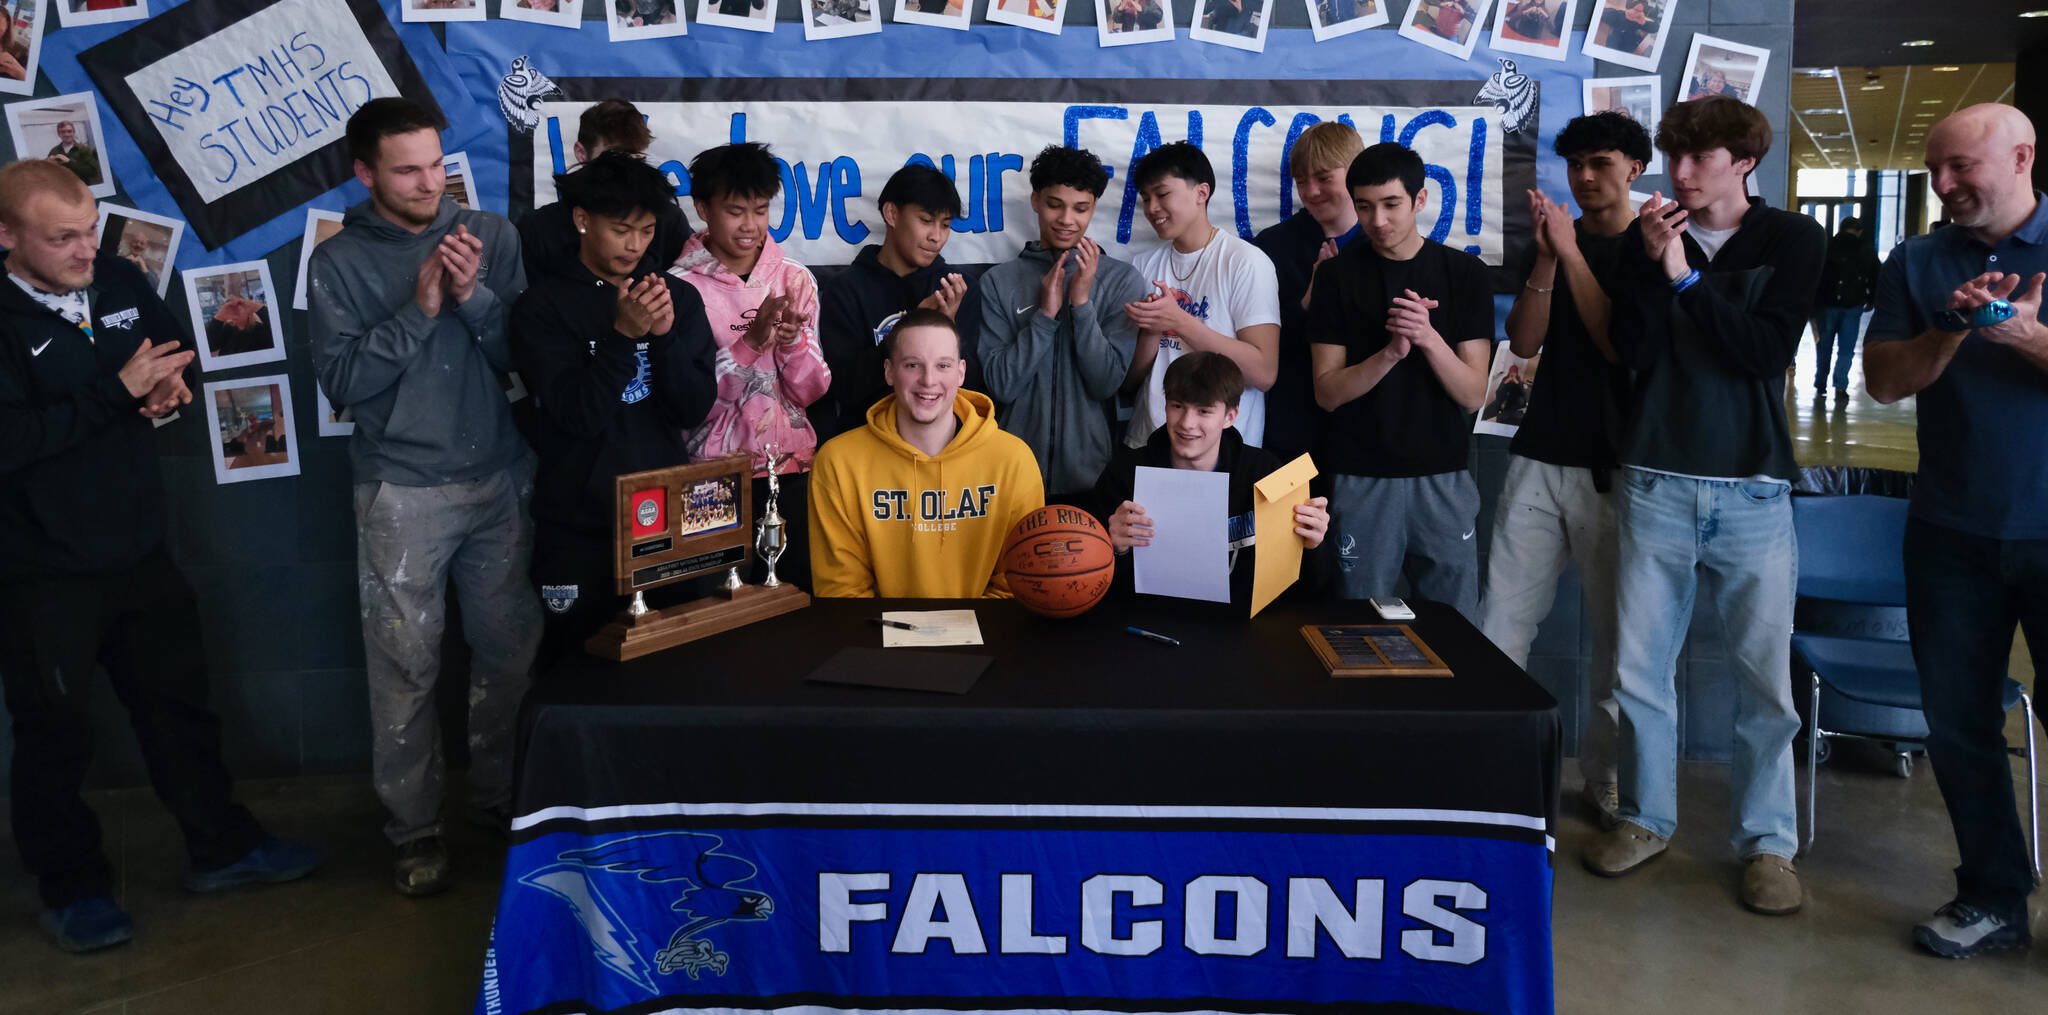 James Polasky, left, and Samuel Lockhart, right, pose with their families after signing letters of intent on Thursday in the TMHS commons to play college basketball. Polasky will attend St. Olaf in Minnesota and Lockhart will attend Edmonds College in Washington state. (Klas Stolpe / For the Juneau Empire)